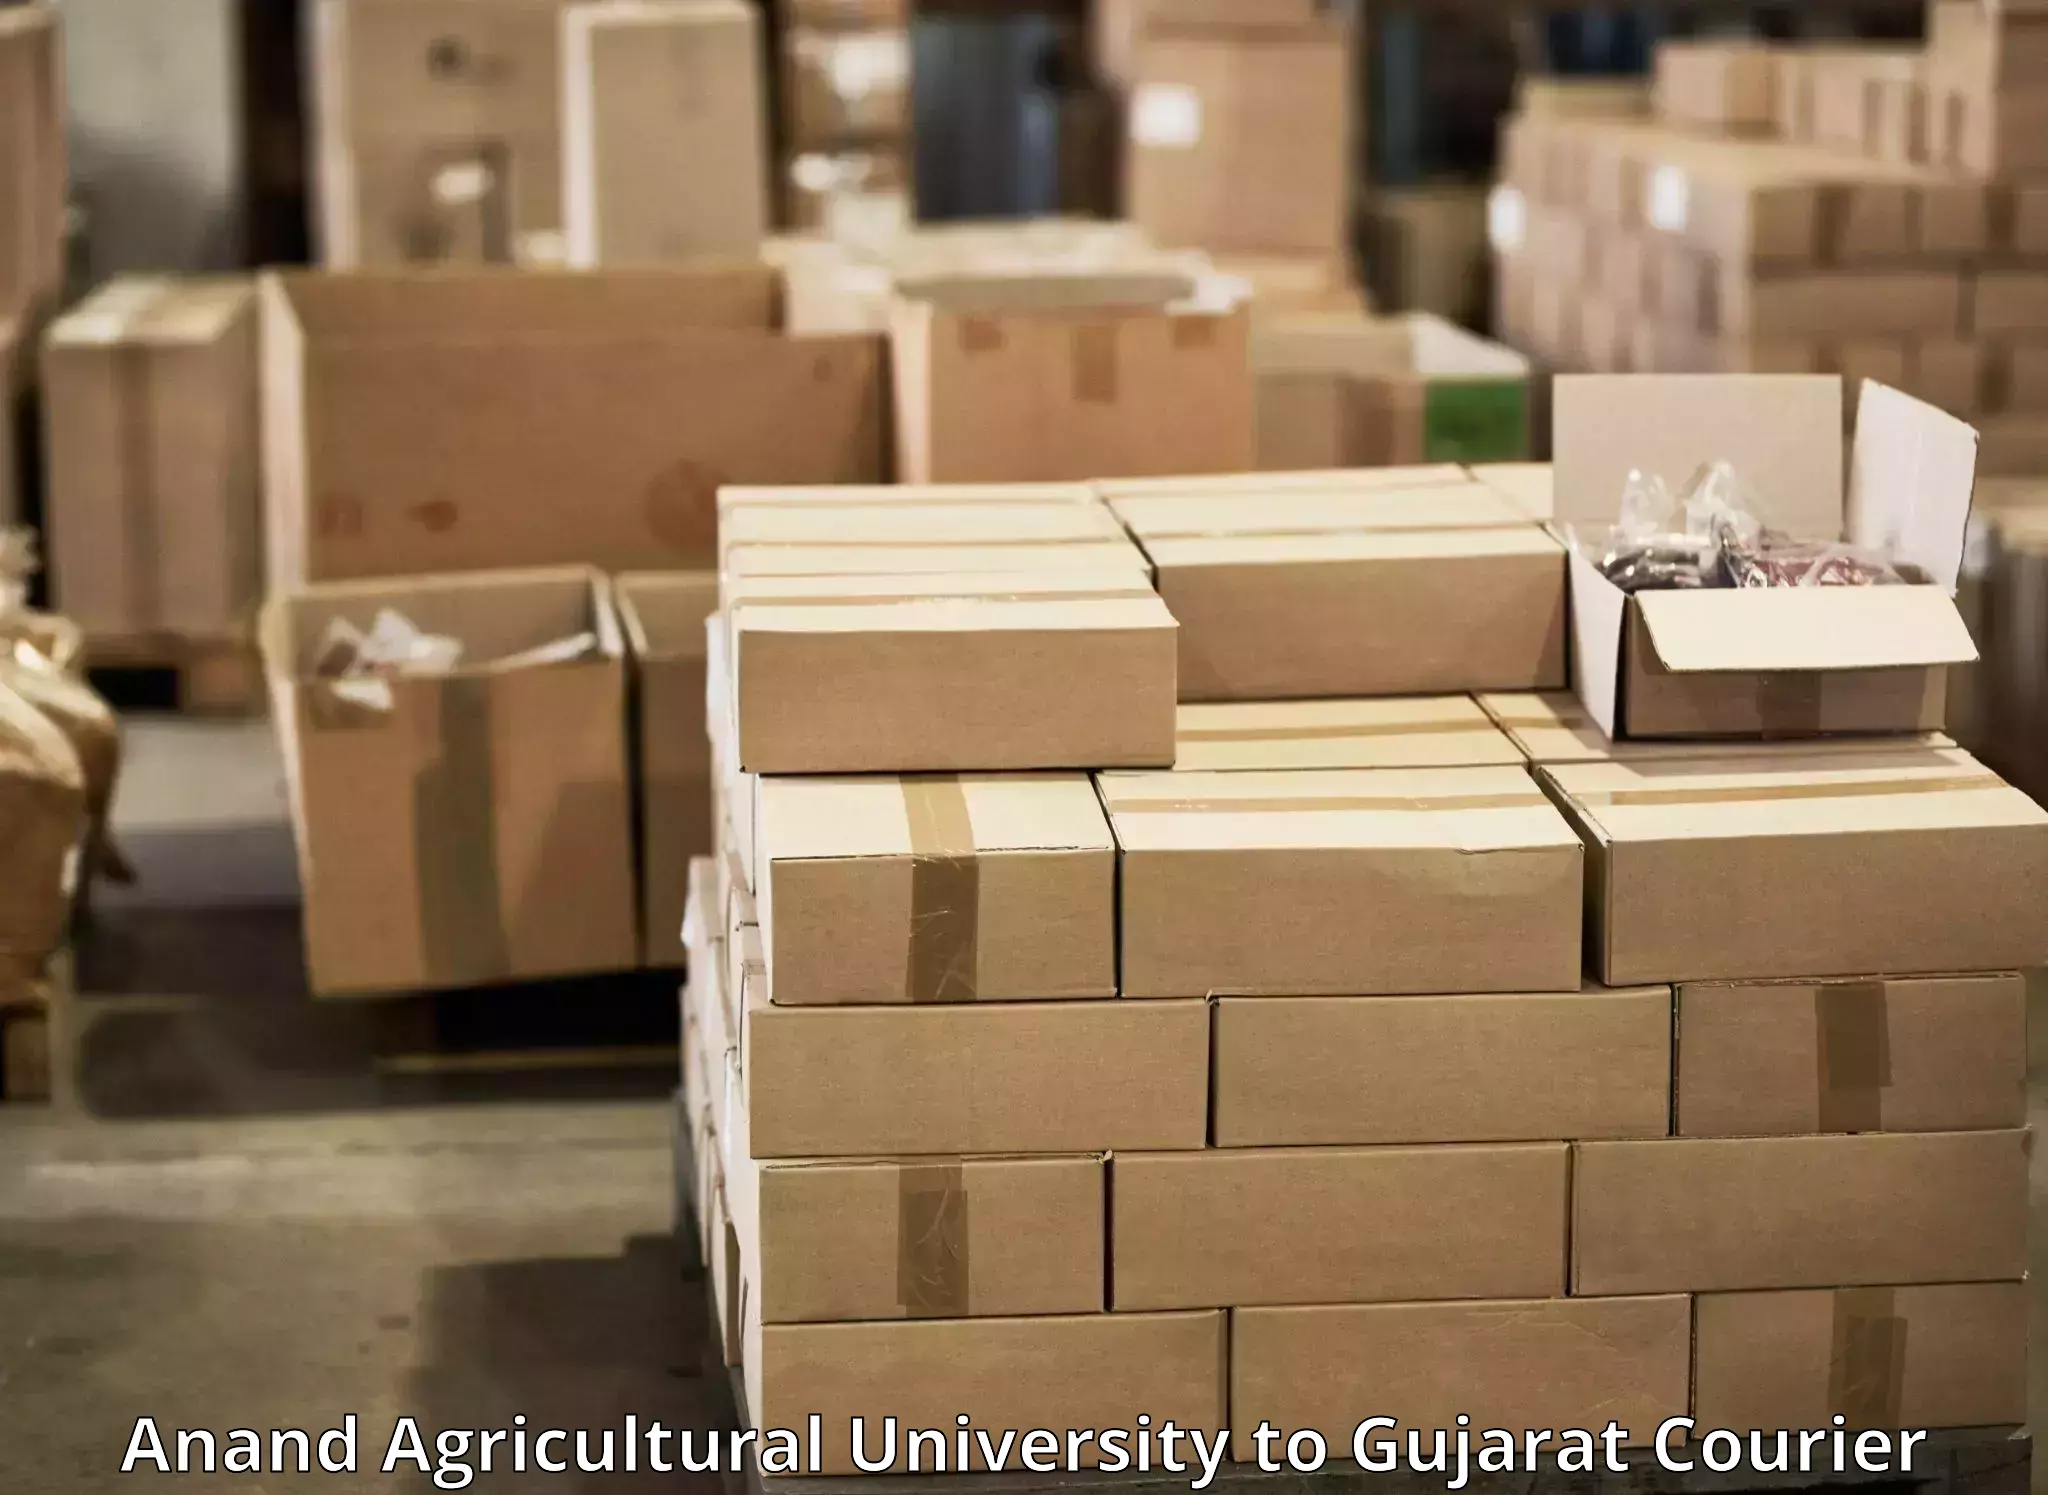 Shipping and handling Anand Agricultural University to Dwarka